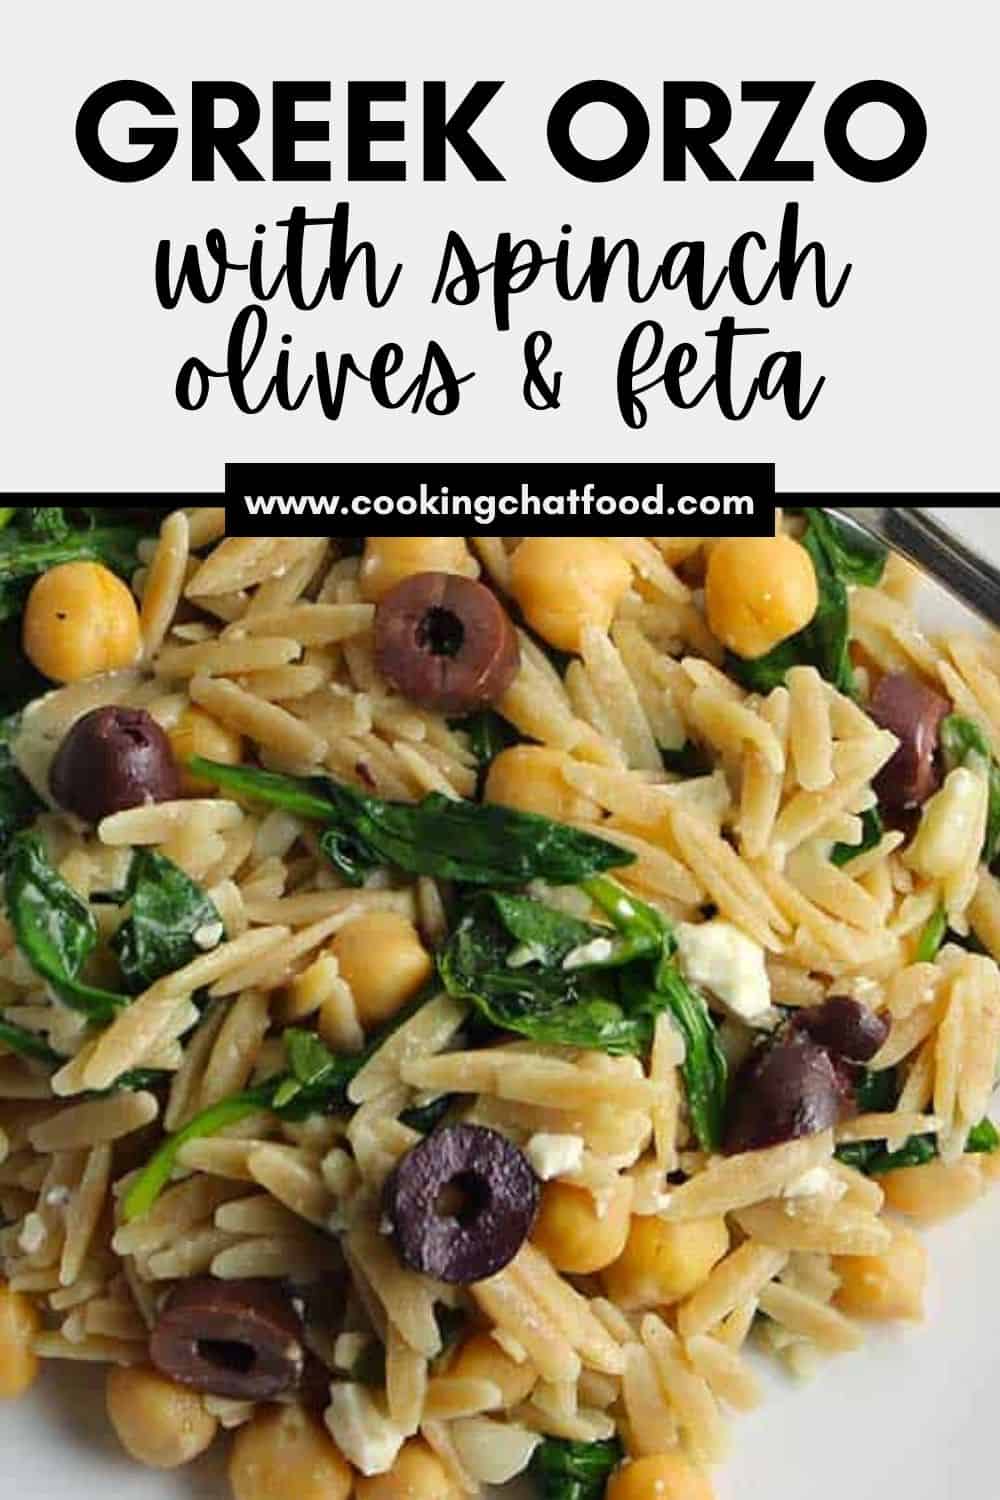 closeup photo of orzo with spinach olives and feta. Text above the food with the name of the dish "Greek Orzo".